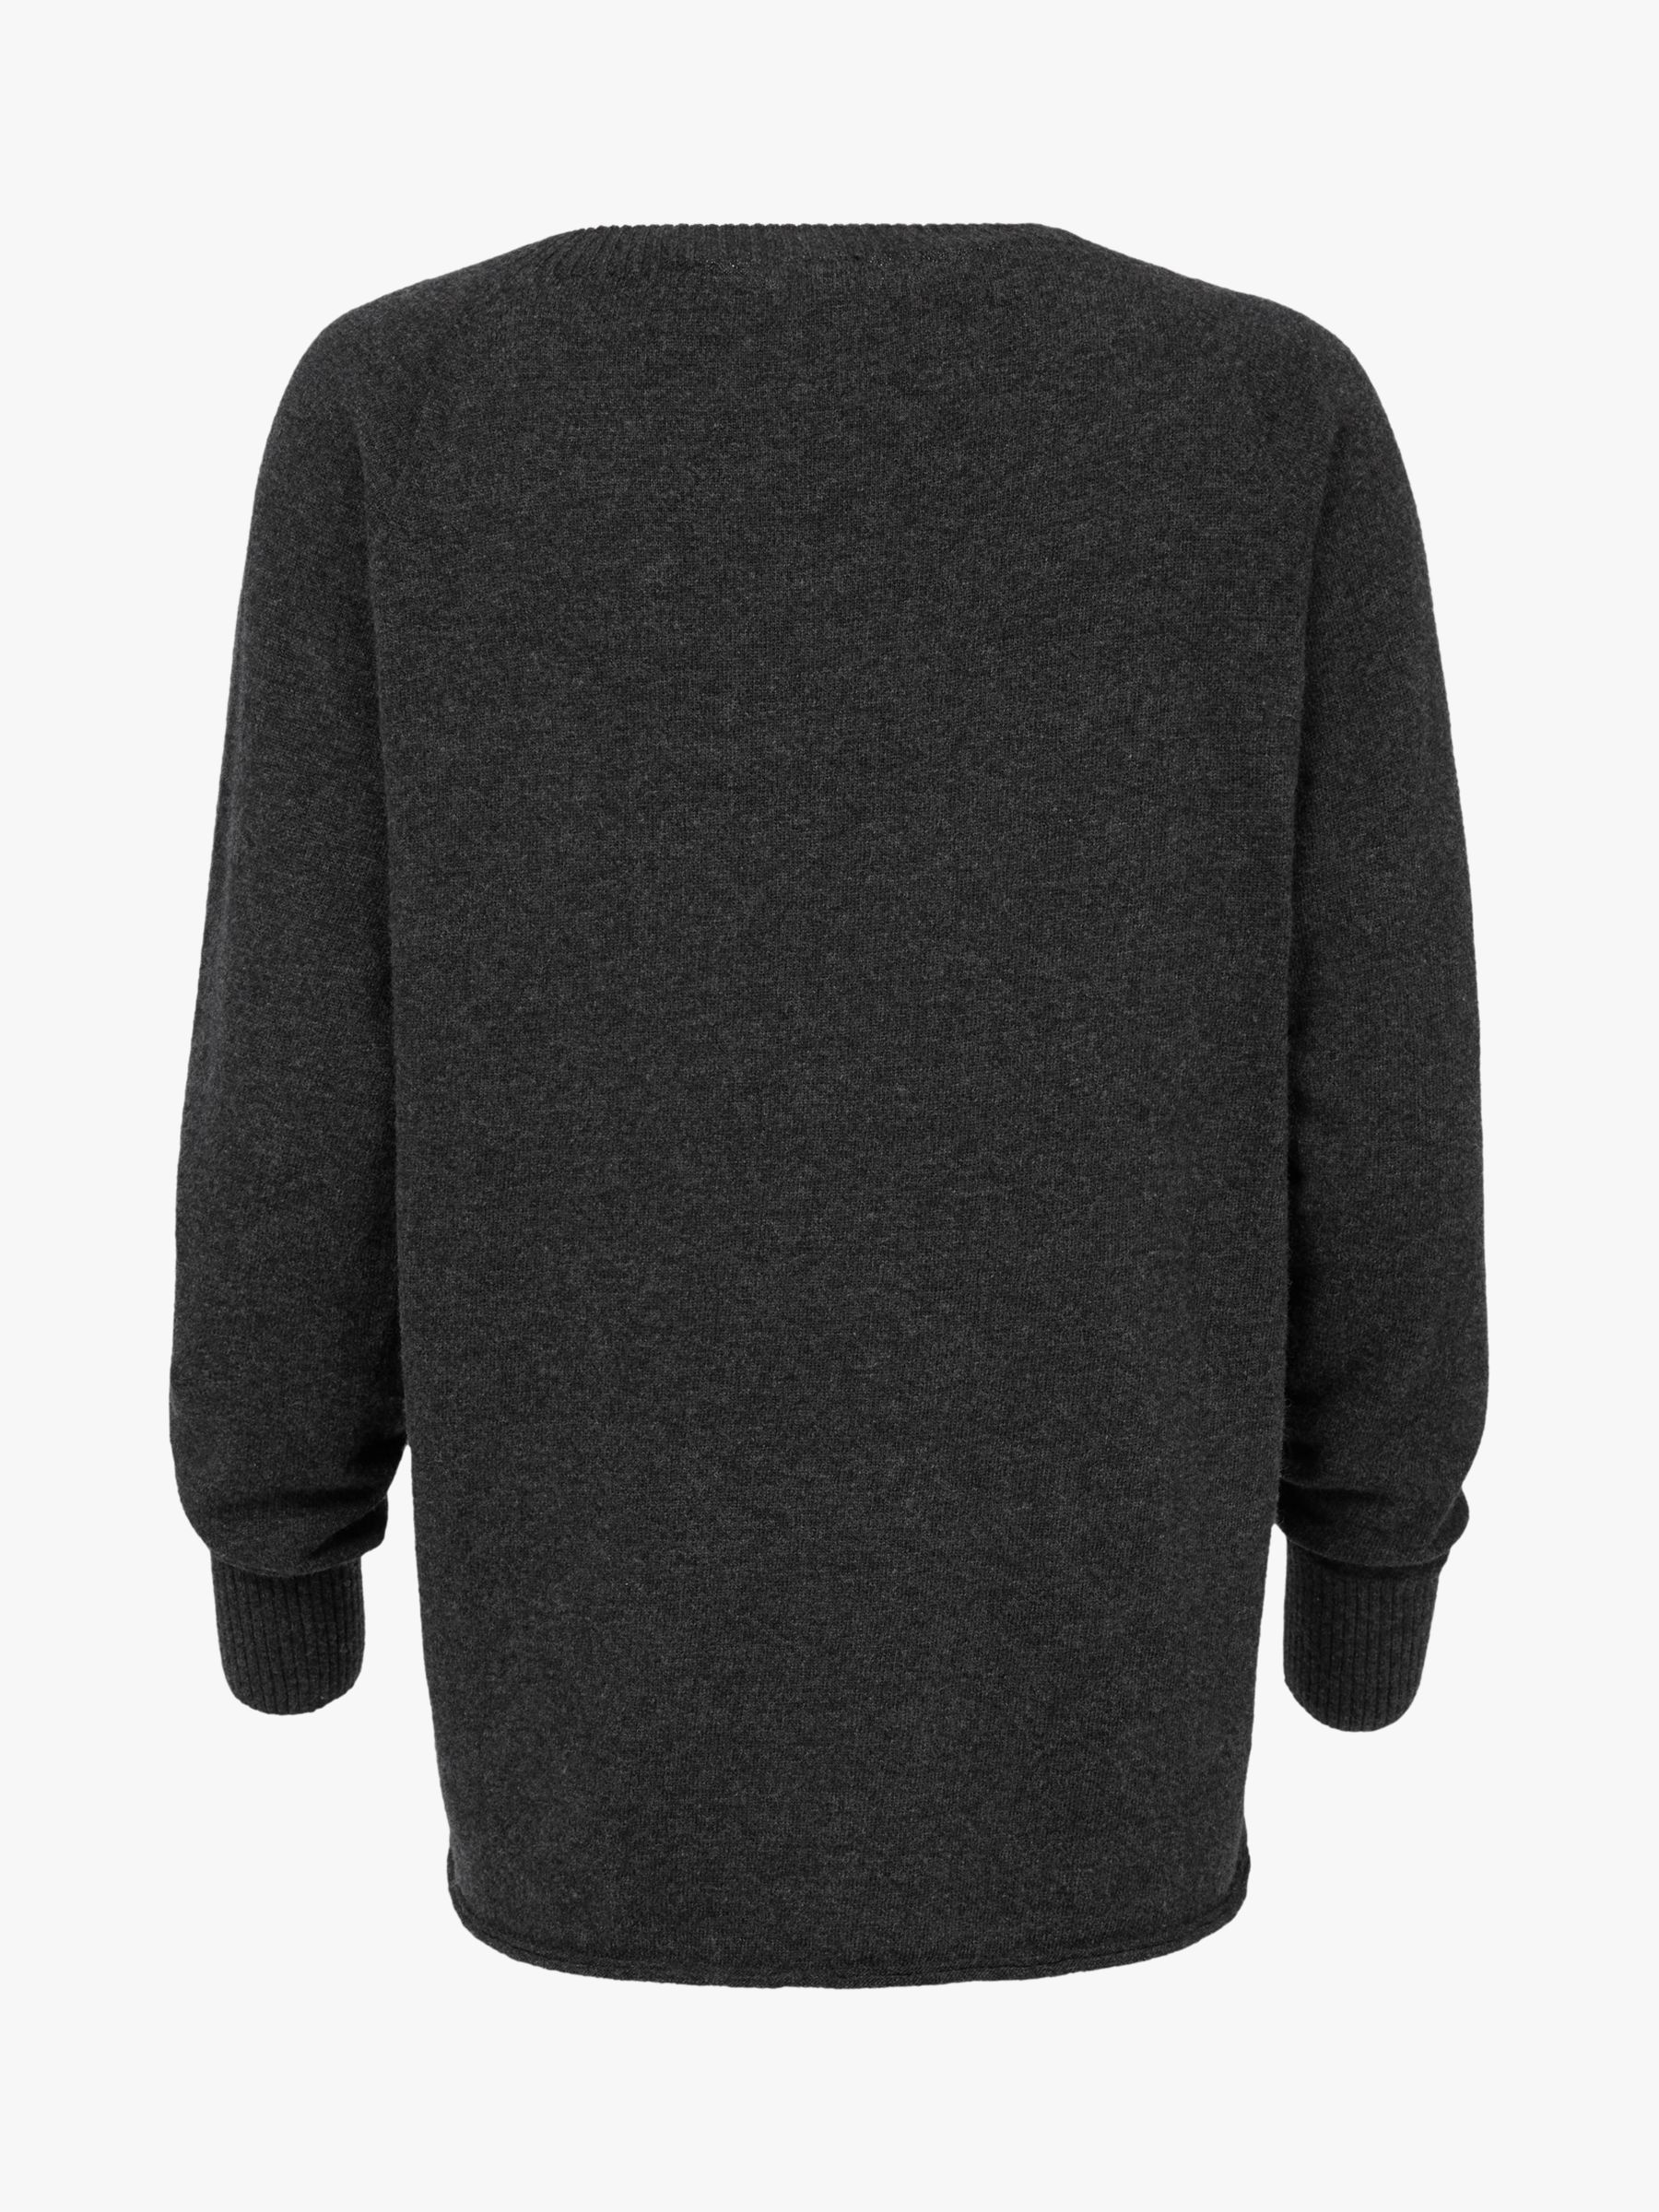 Celtic & Co. Geelong Slouch Crew Neck Jumper, Charcoal at John Lewis ...